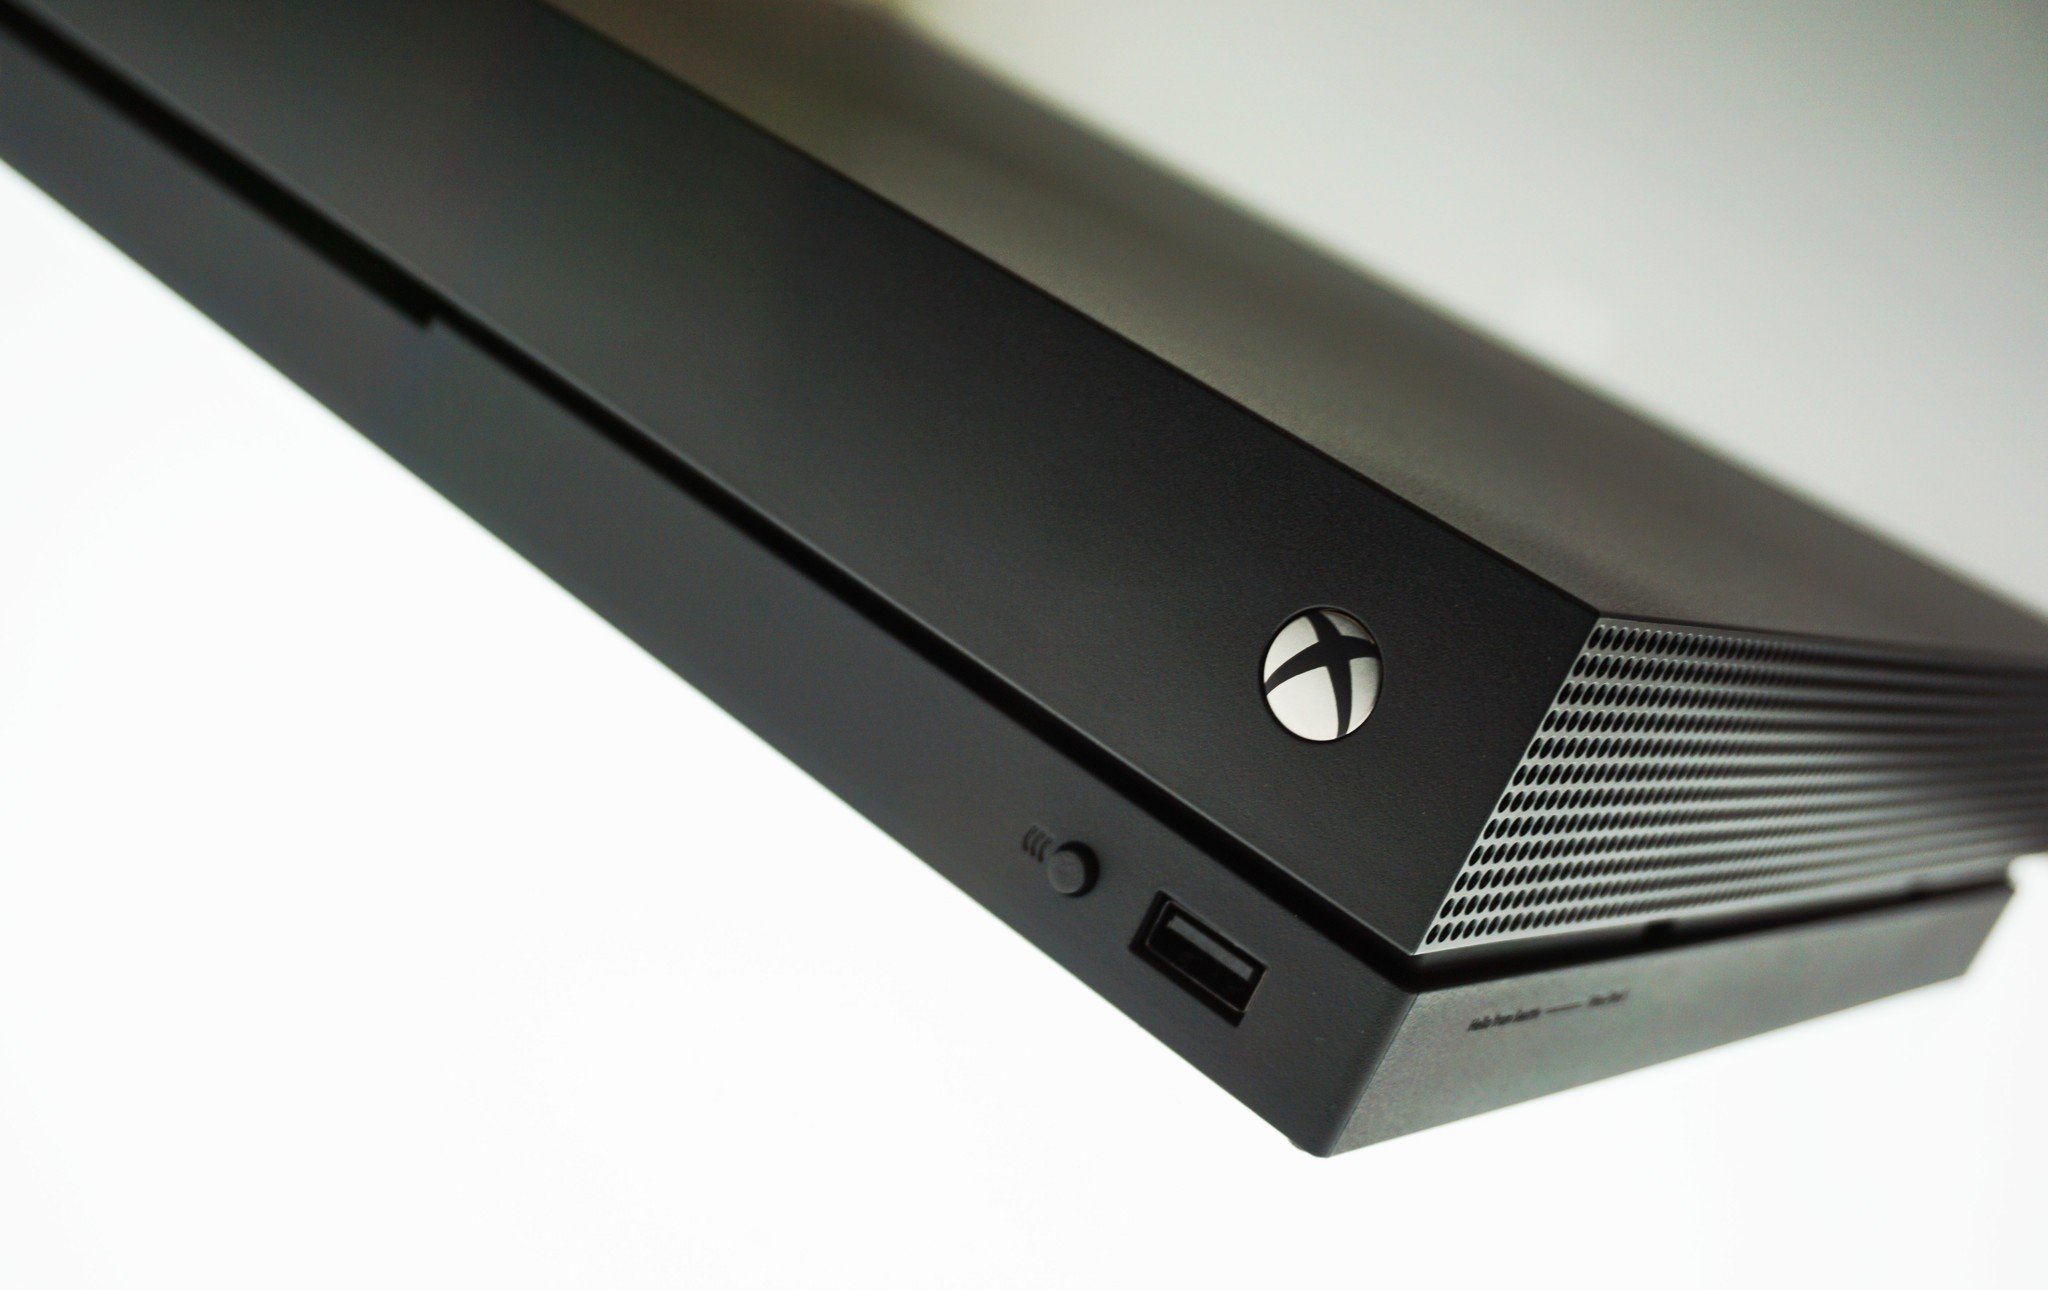 New Xbox unit established to bring gaming partners on board with Azure